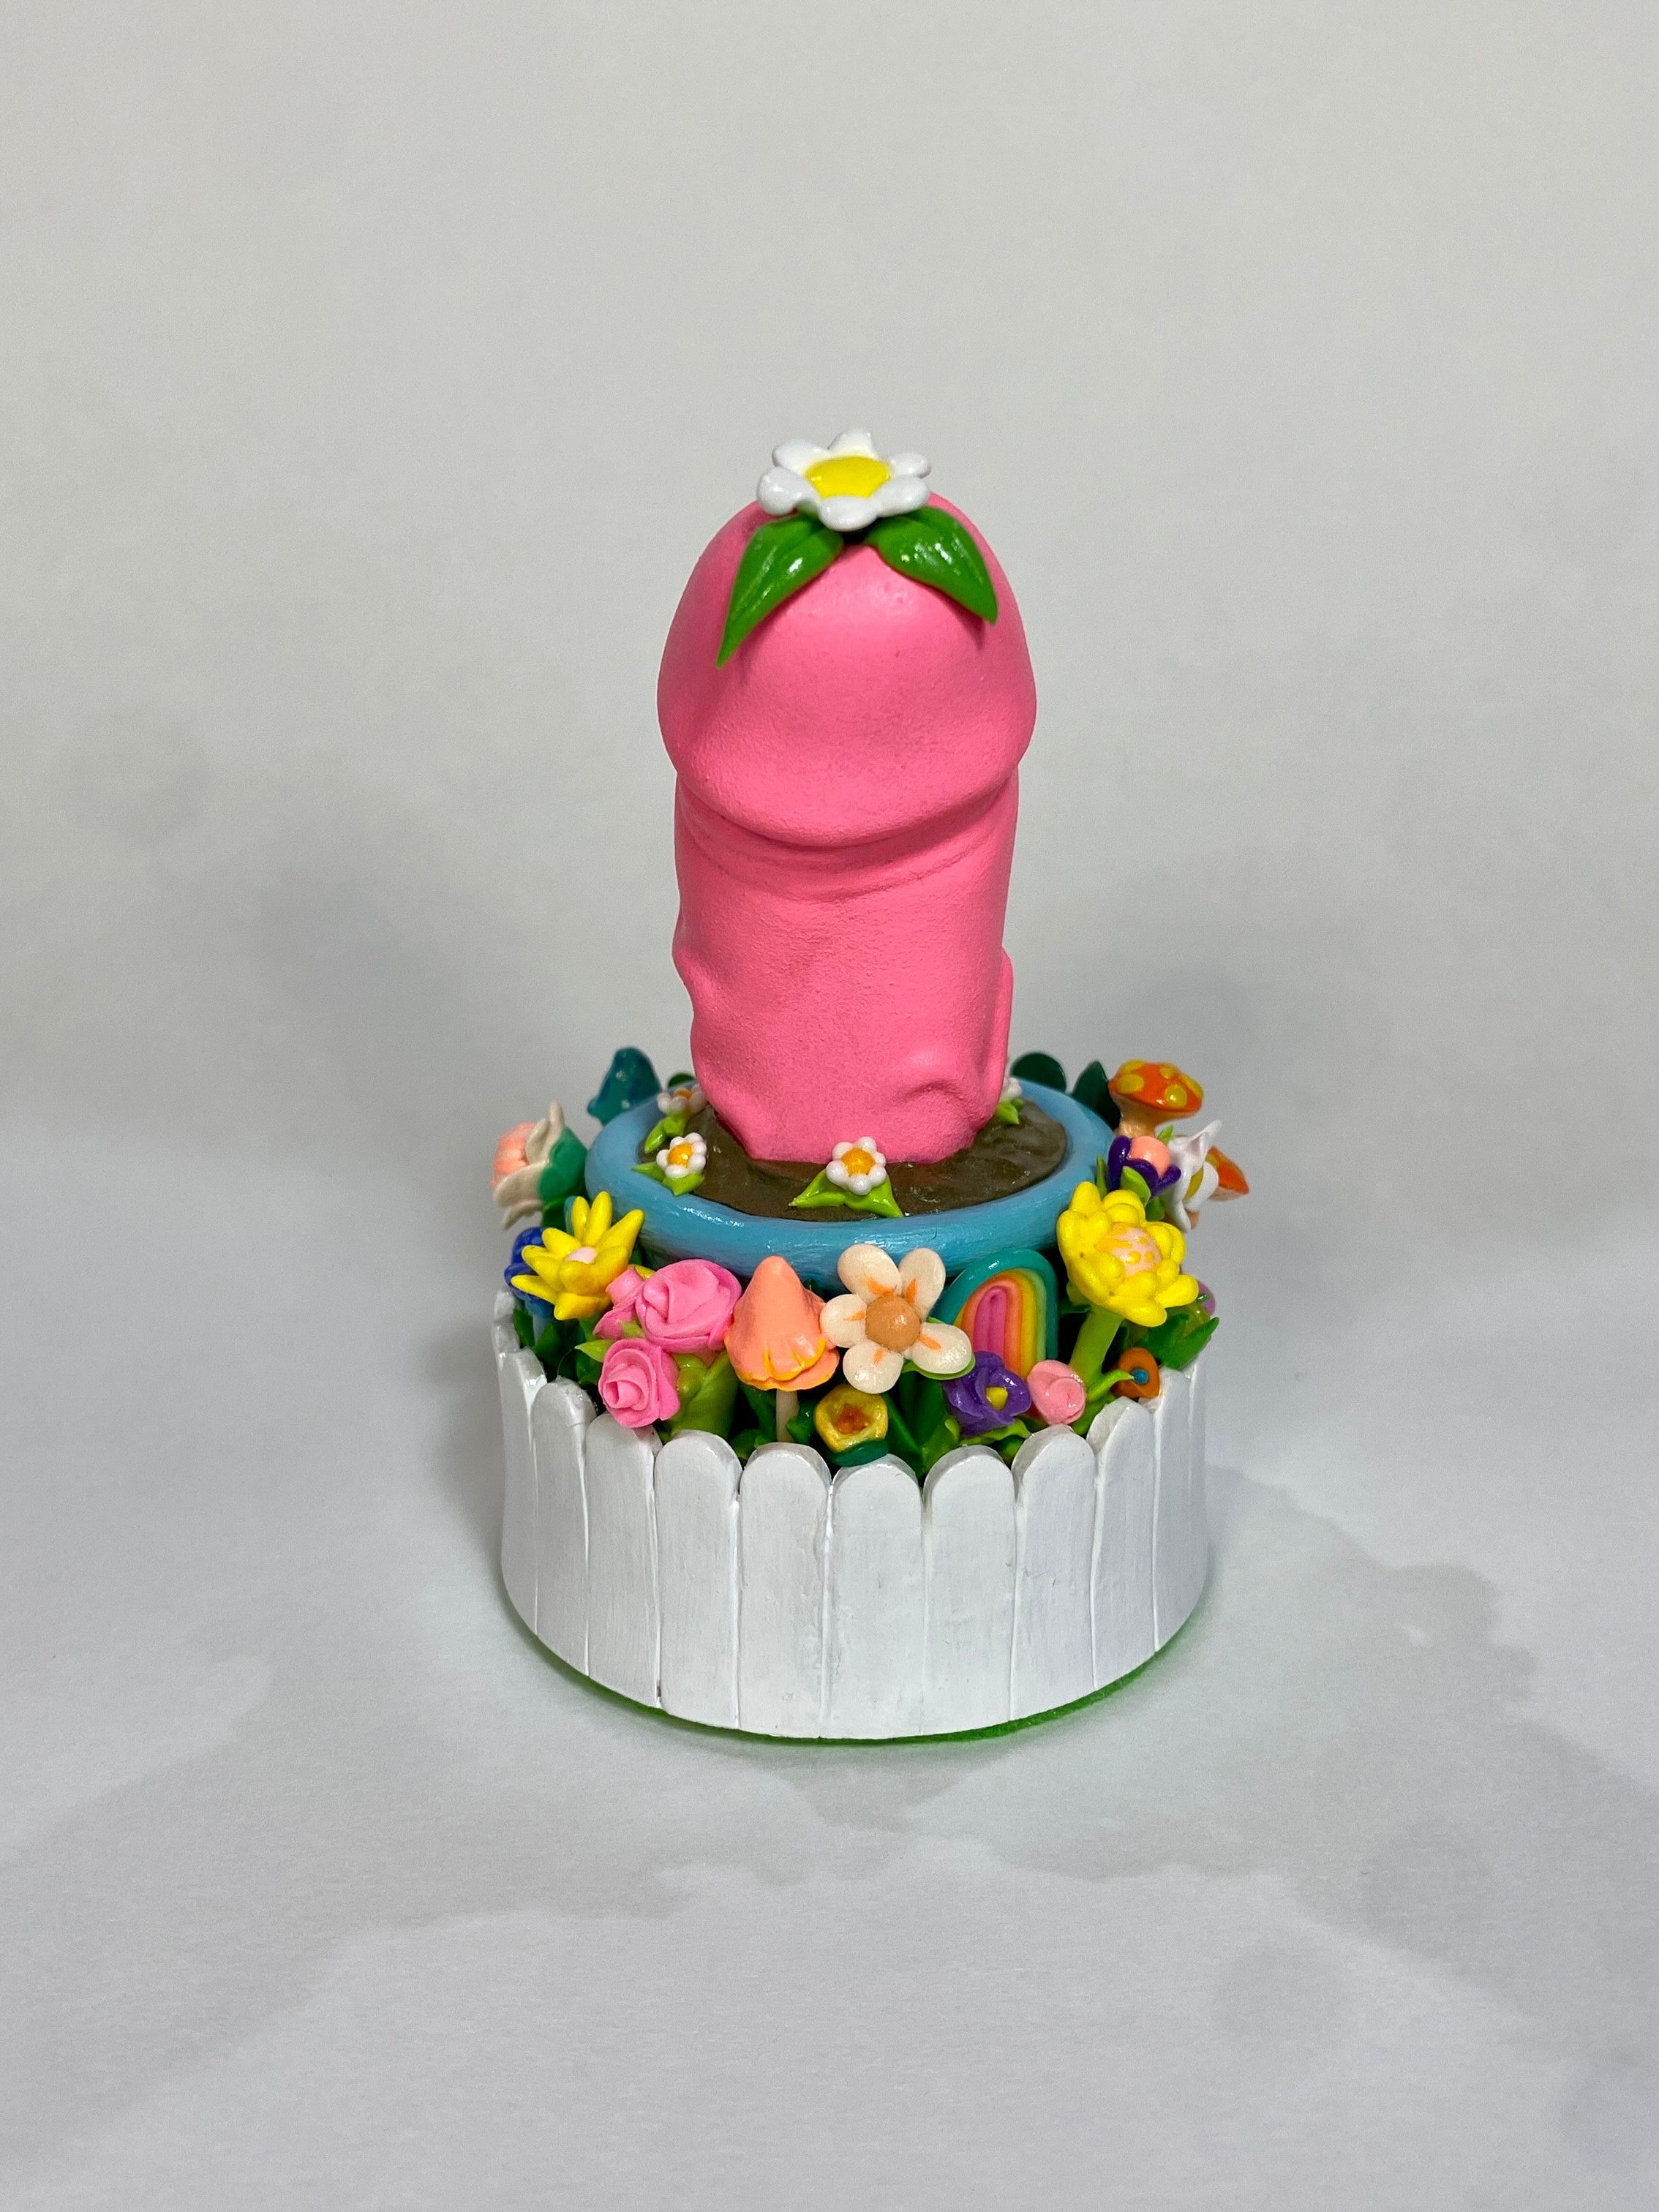 Sculpture of a hand holding a glove with a pink toy, flowers, and a cake in the image.